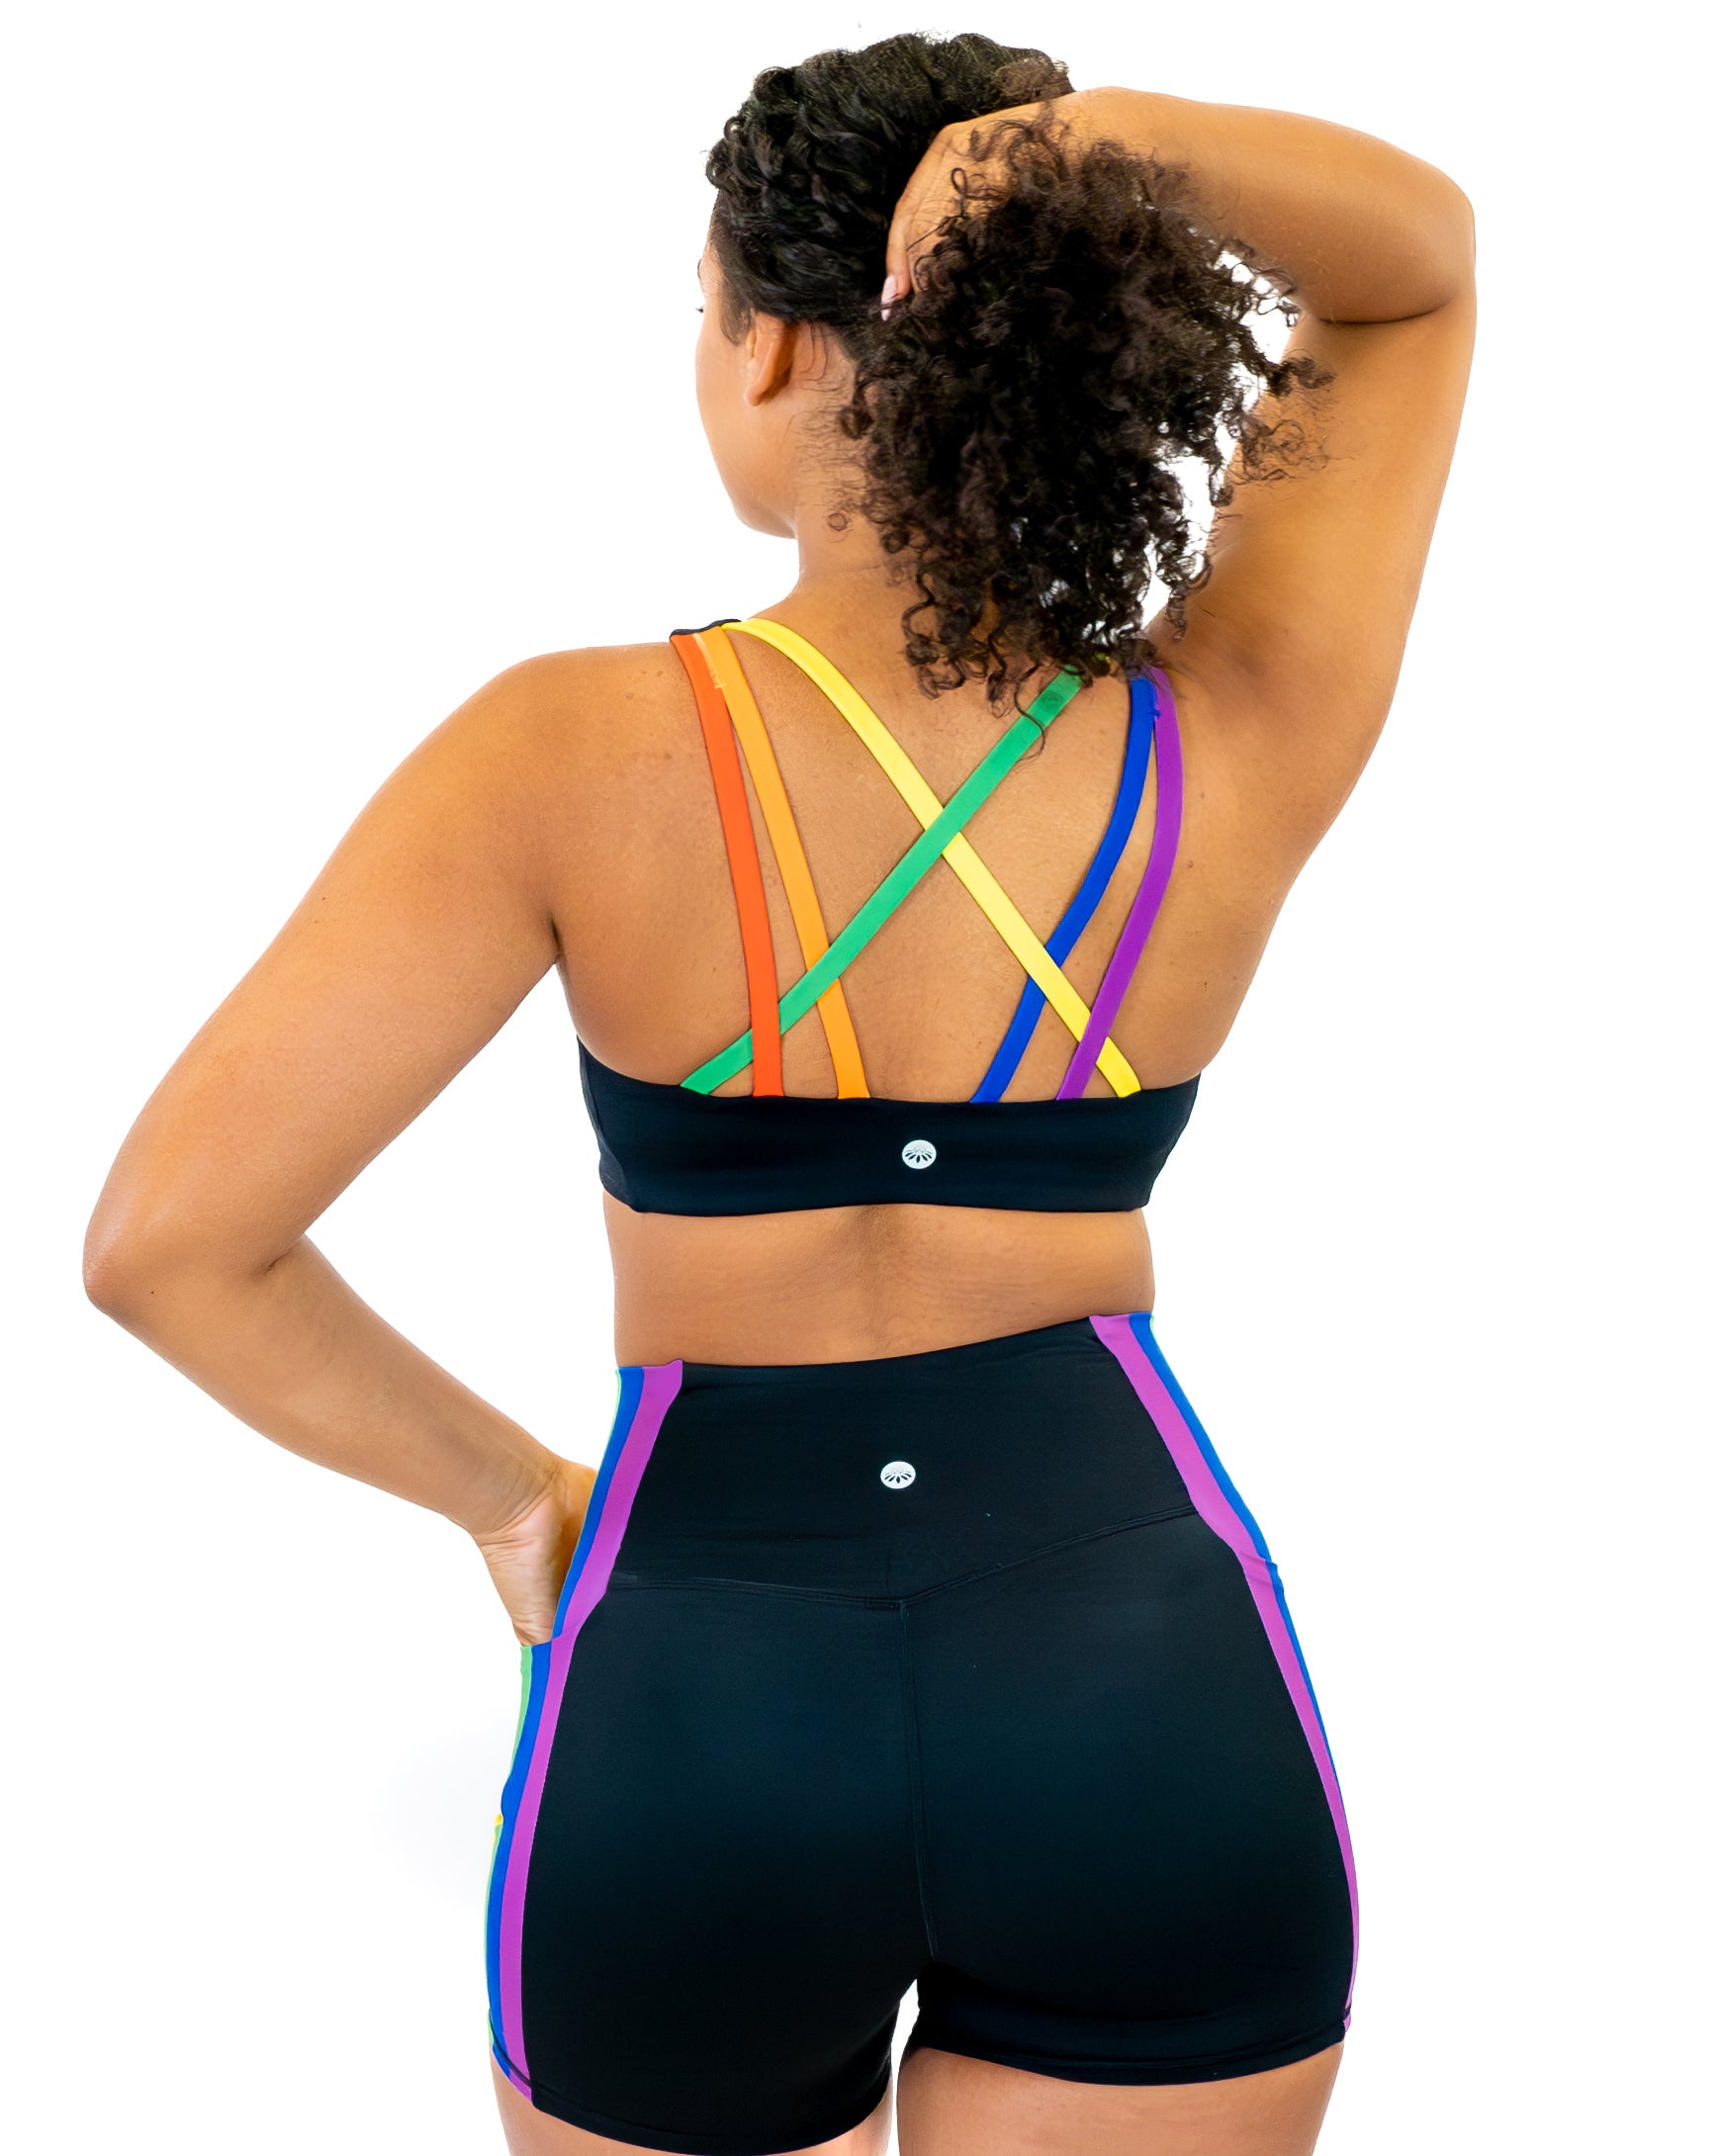 These Sports Bras Are So Comfortable and Supportive, Shoppers 'Can